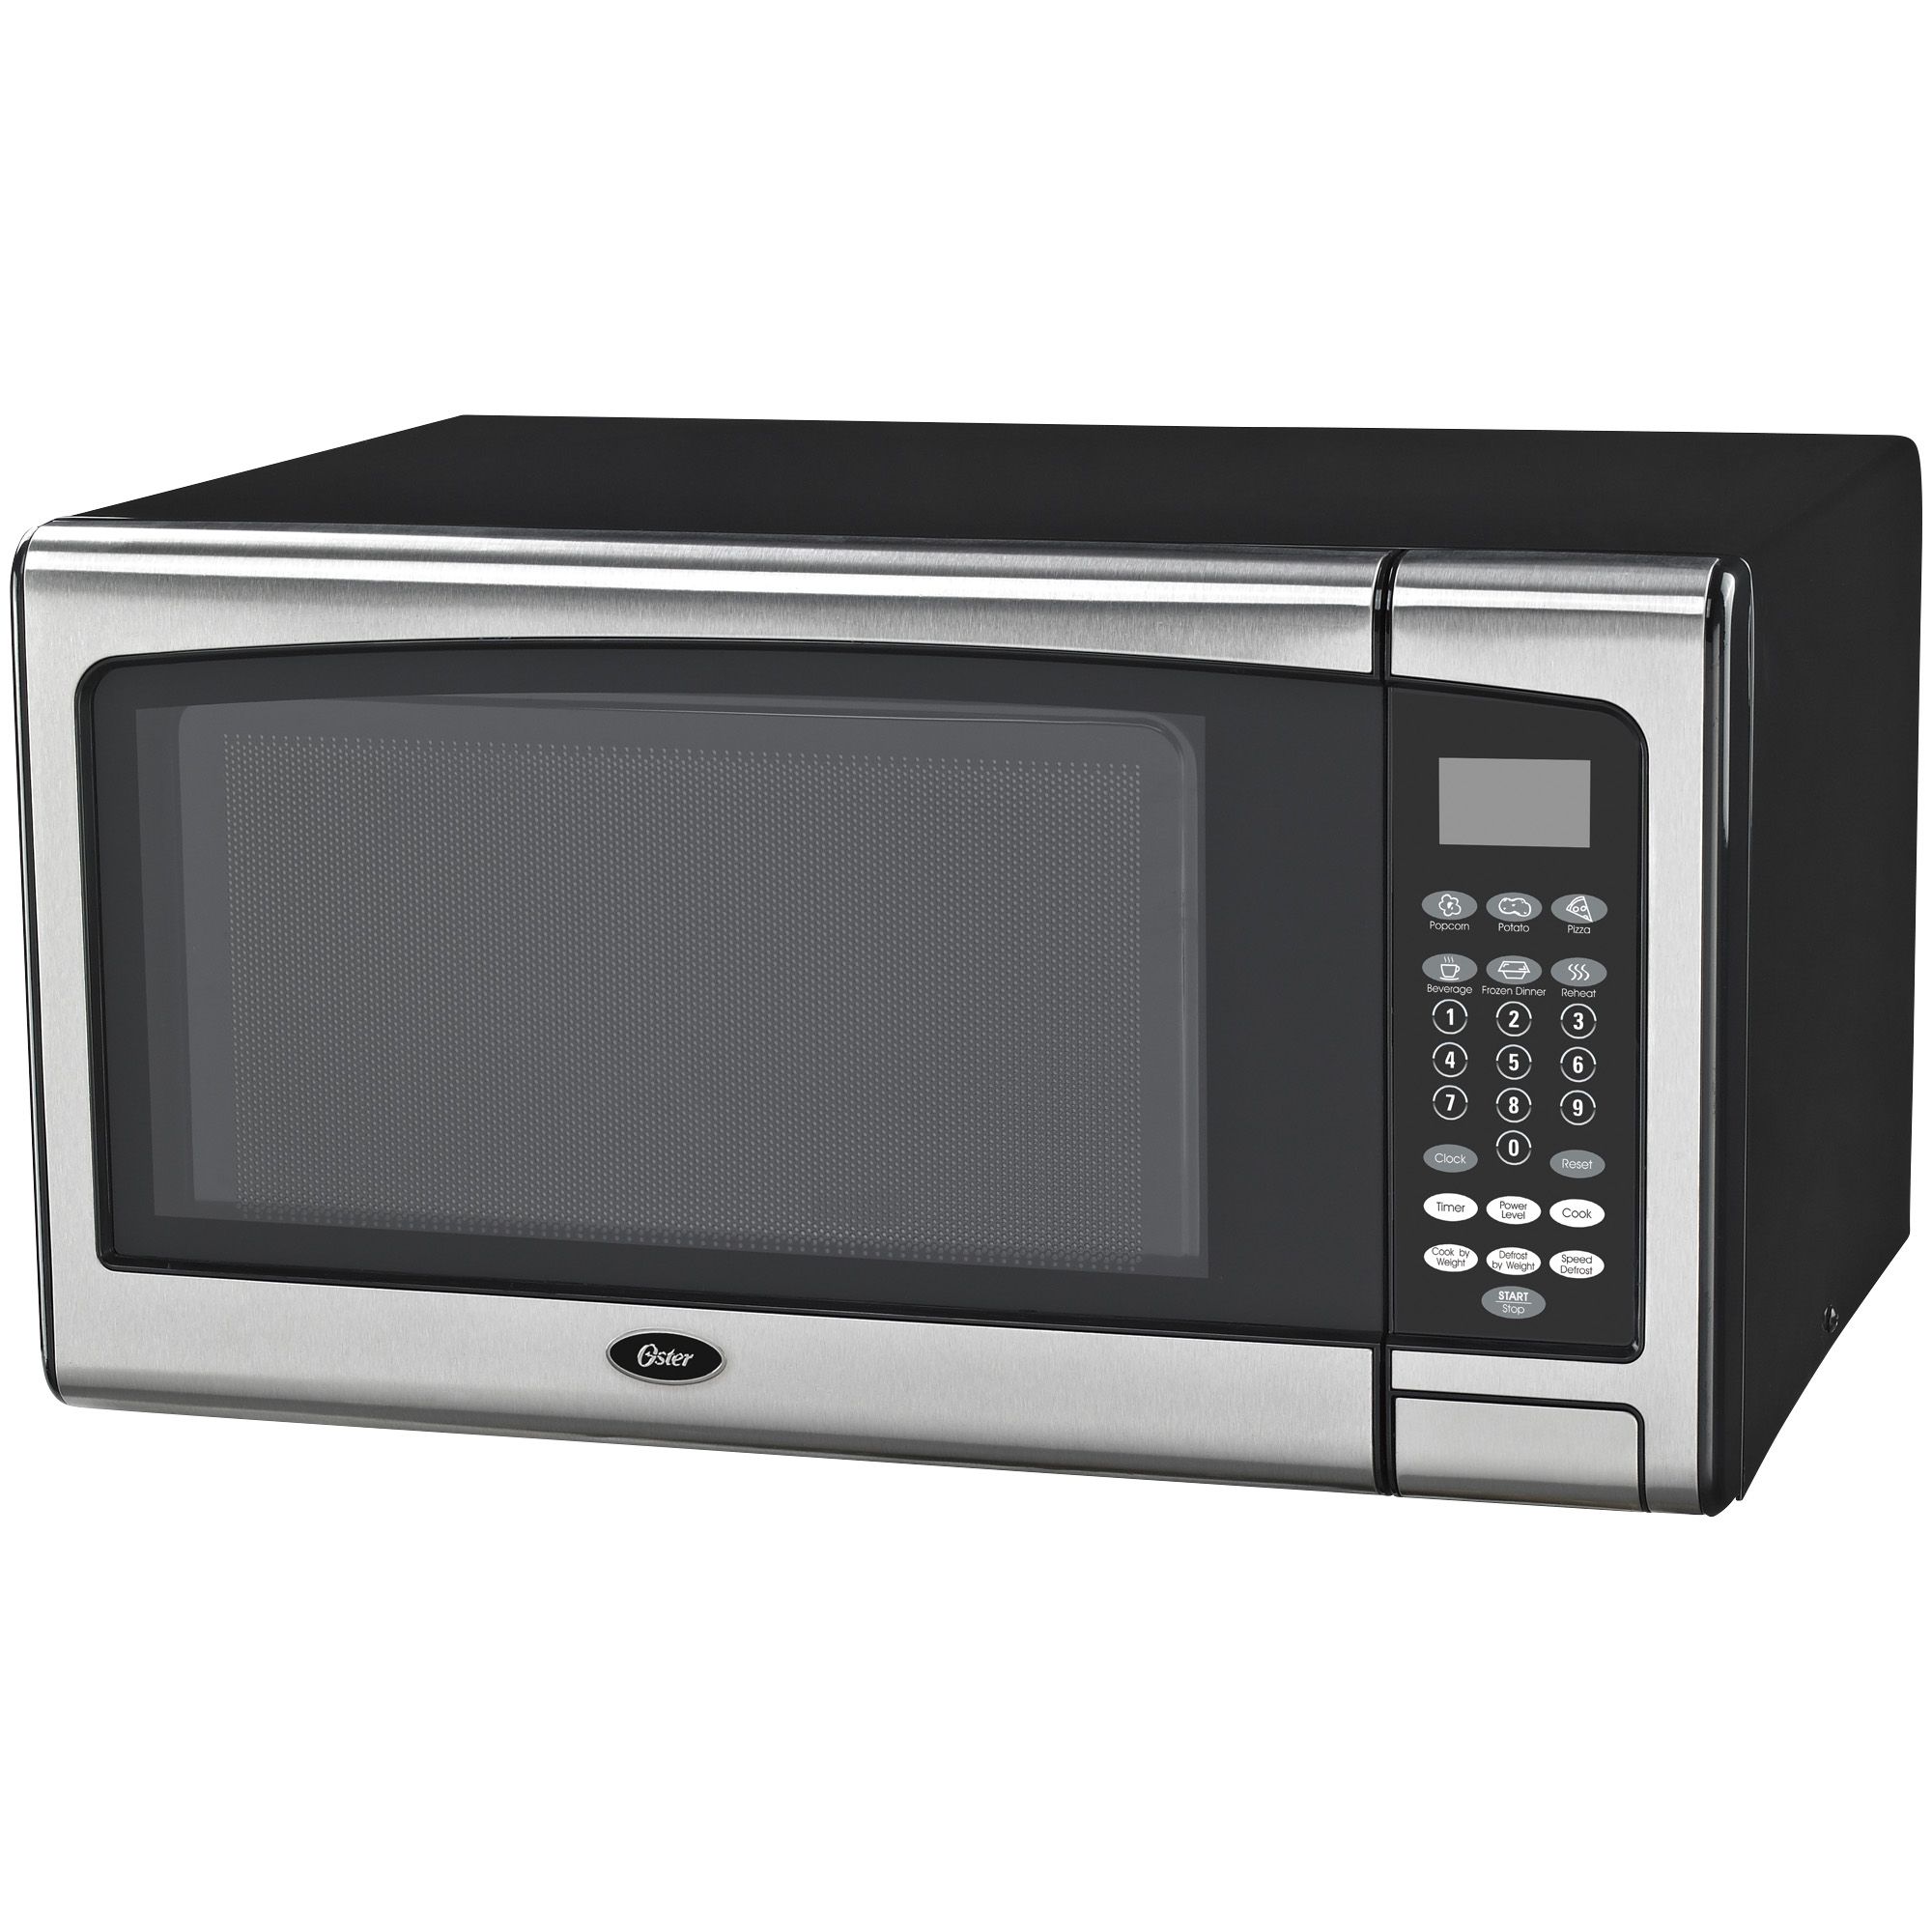 Oster Countertop Microwave Stainless Steel Black 1.1 cu. Ft. 1000